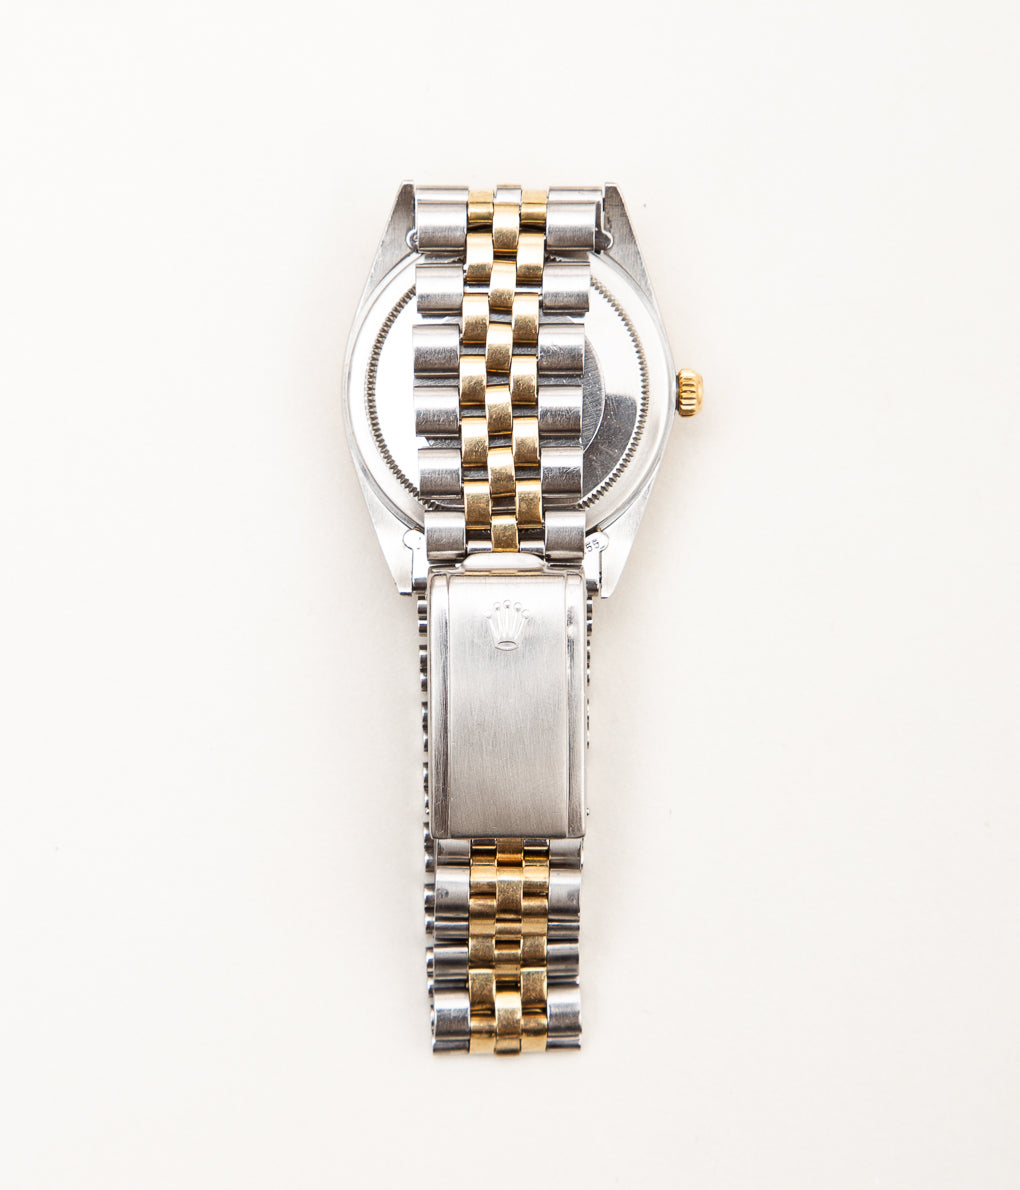 VINTAGE WATCH "1969's ROLEX OYSTER PERPETUAL DATEJUST TURN-O-GRAPH "THUNDERBIRD" Ref.1625"(YELLOW GOLD)